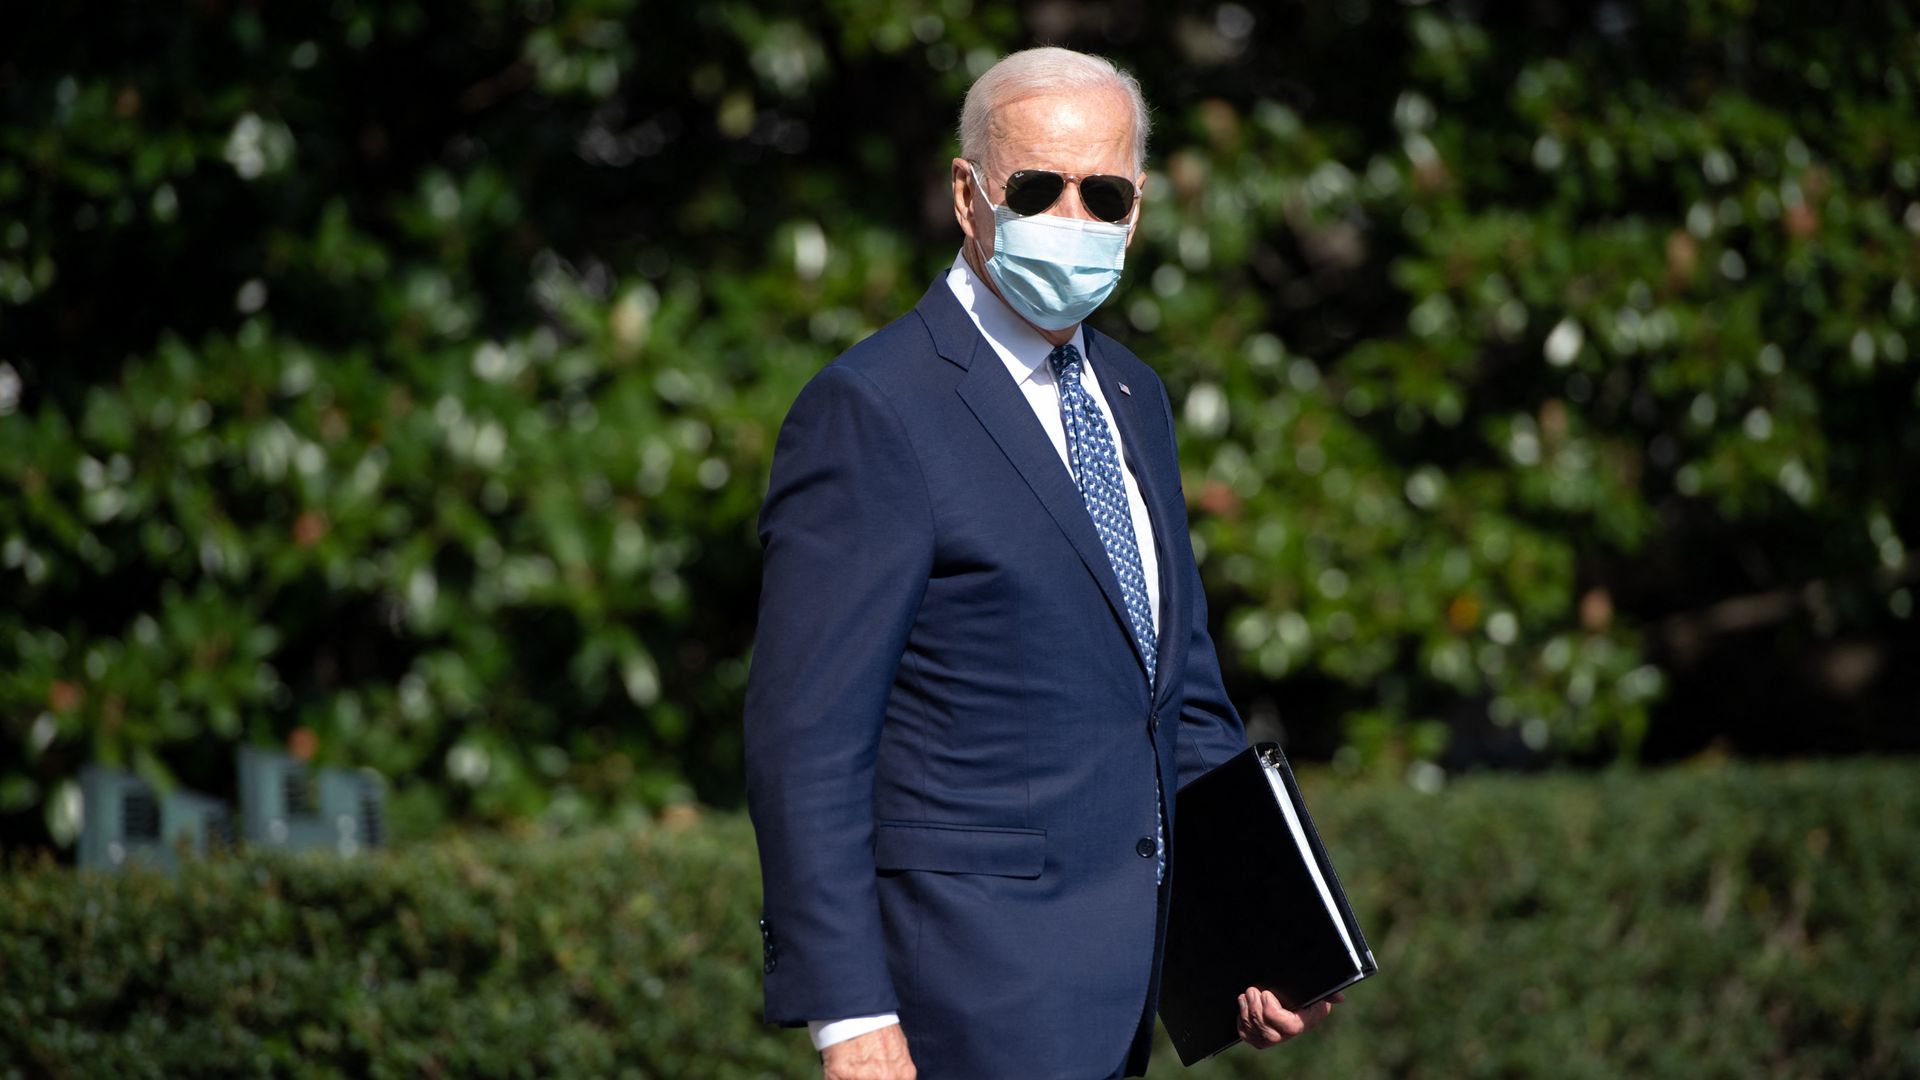 Photo of Joe Biden wearing sunglasses and a mask as he walks with a binder in one hand